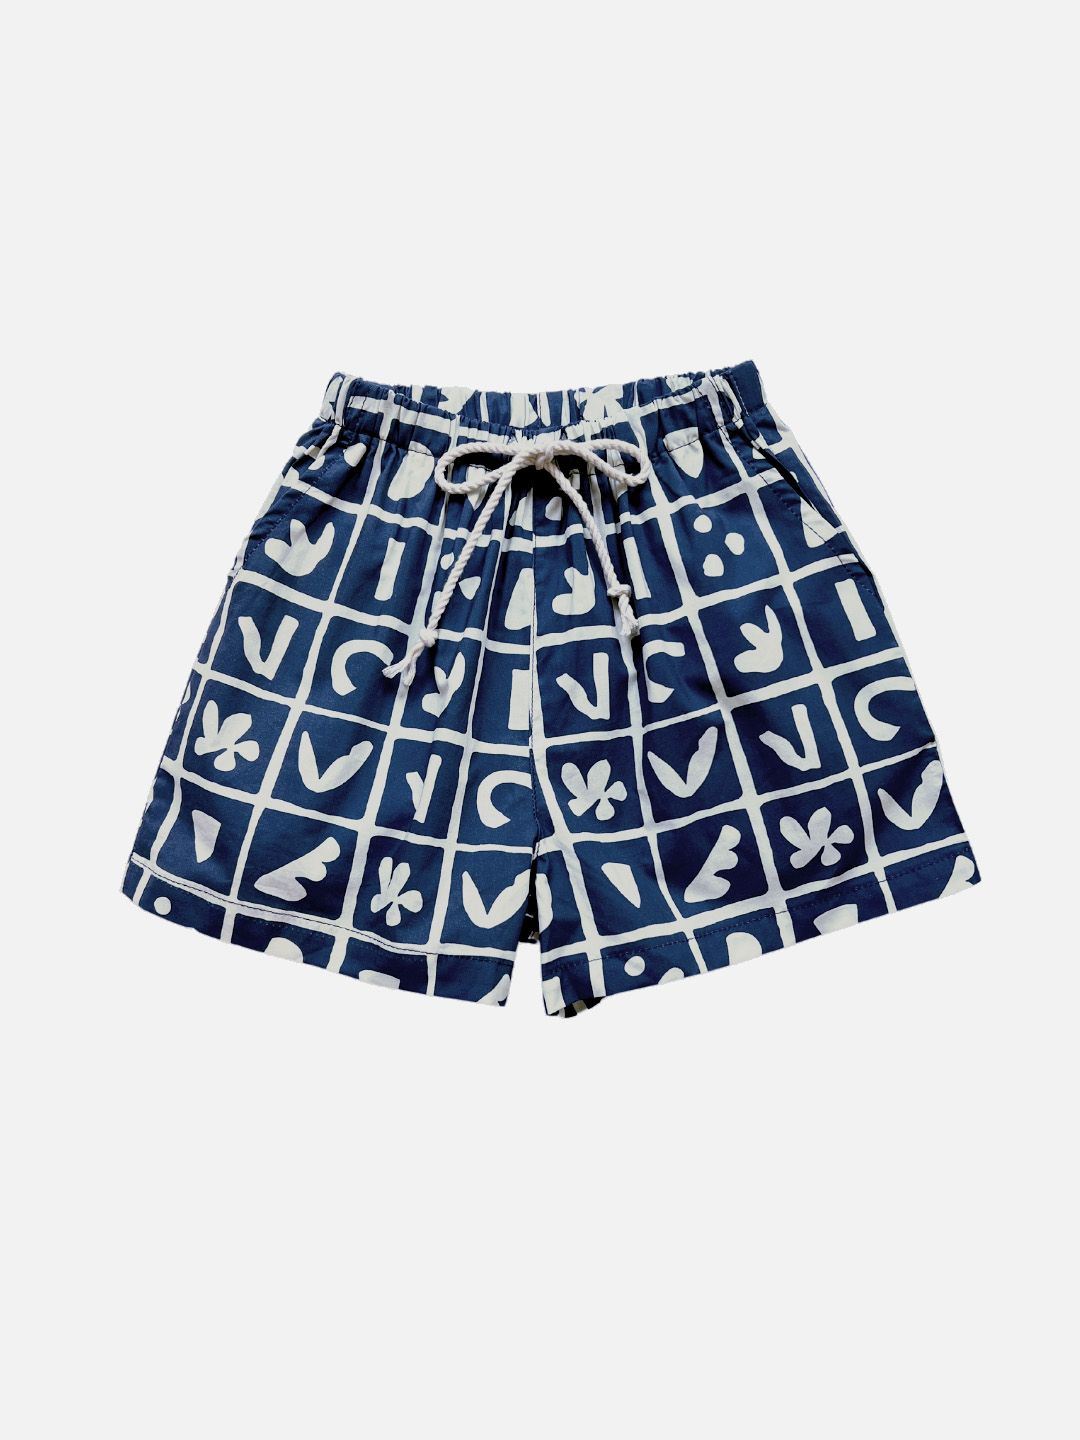 A pair of kids' shorts in deep blue, overlaid with a grid of different shapes in white